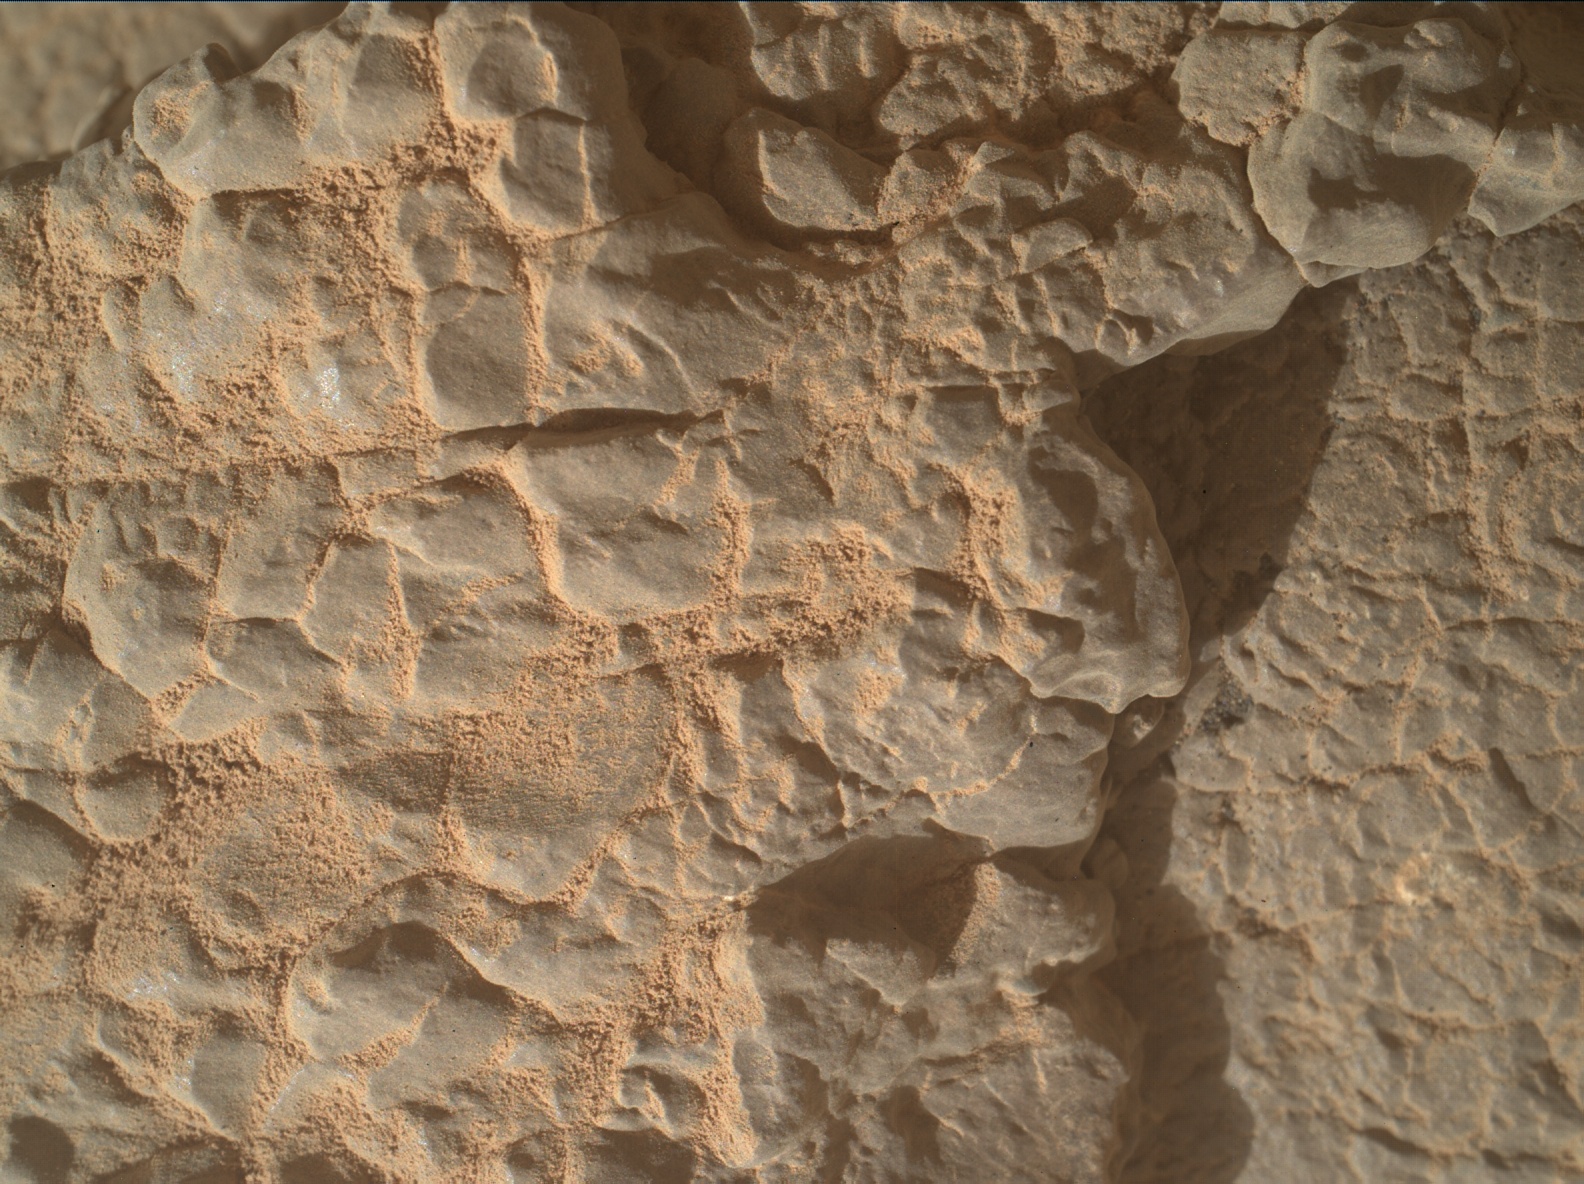 Nasa's Mars rover Curiosity acquired this image using its Mars Hand Lens Imager (MAHLI) on Sol 3539